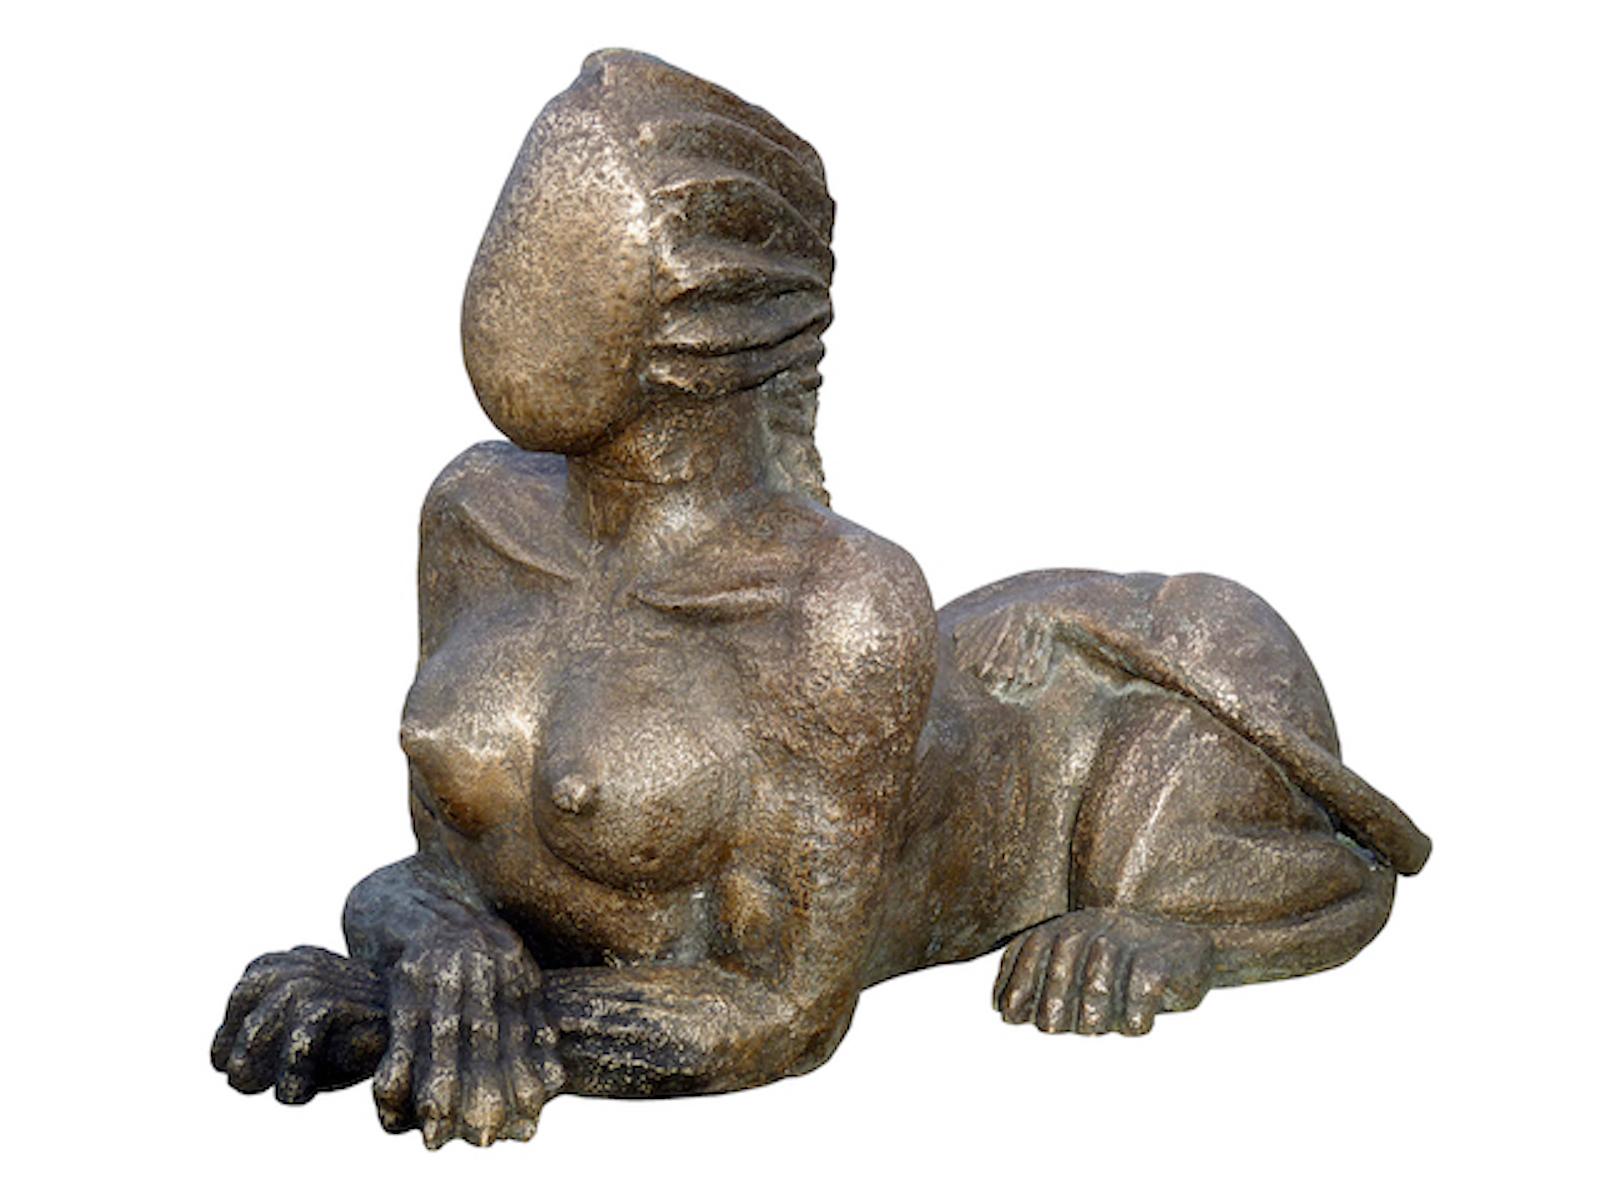 "Sphinge" bronze figurative sculpture from 2 to 8 60x45x80cm 2009 - Sculpture by Emmanuelle Vroelant